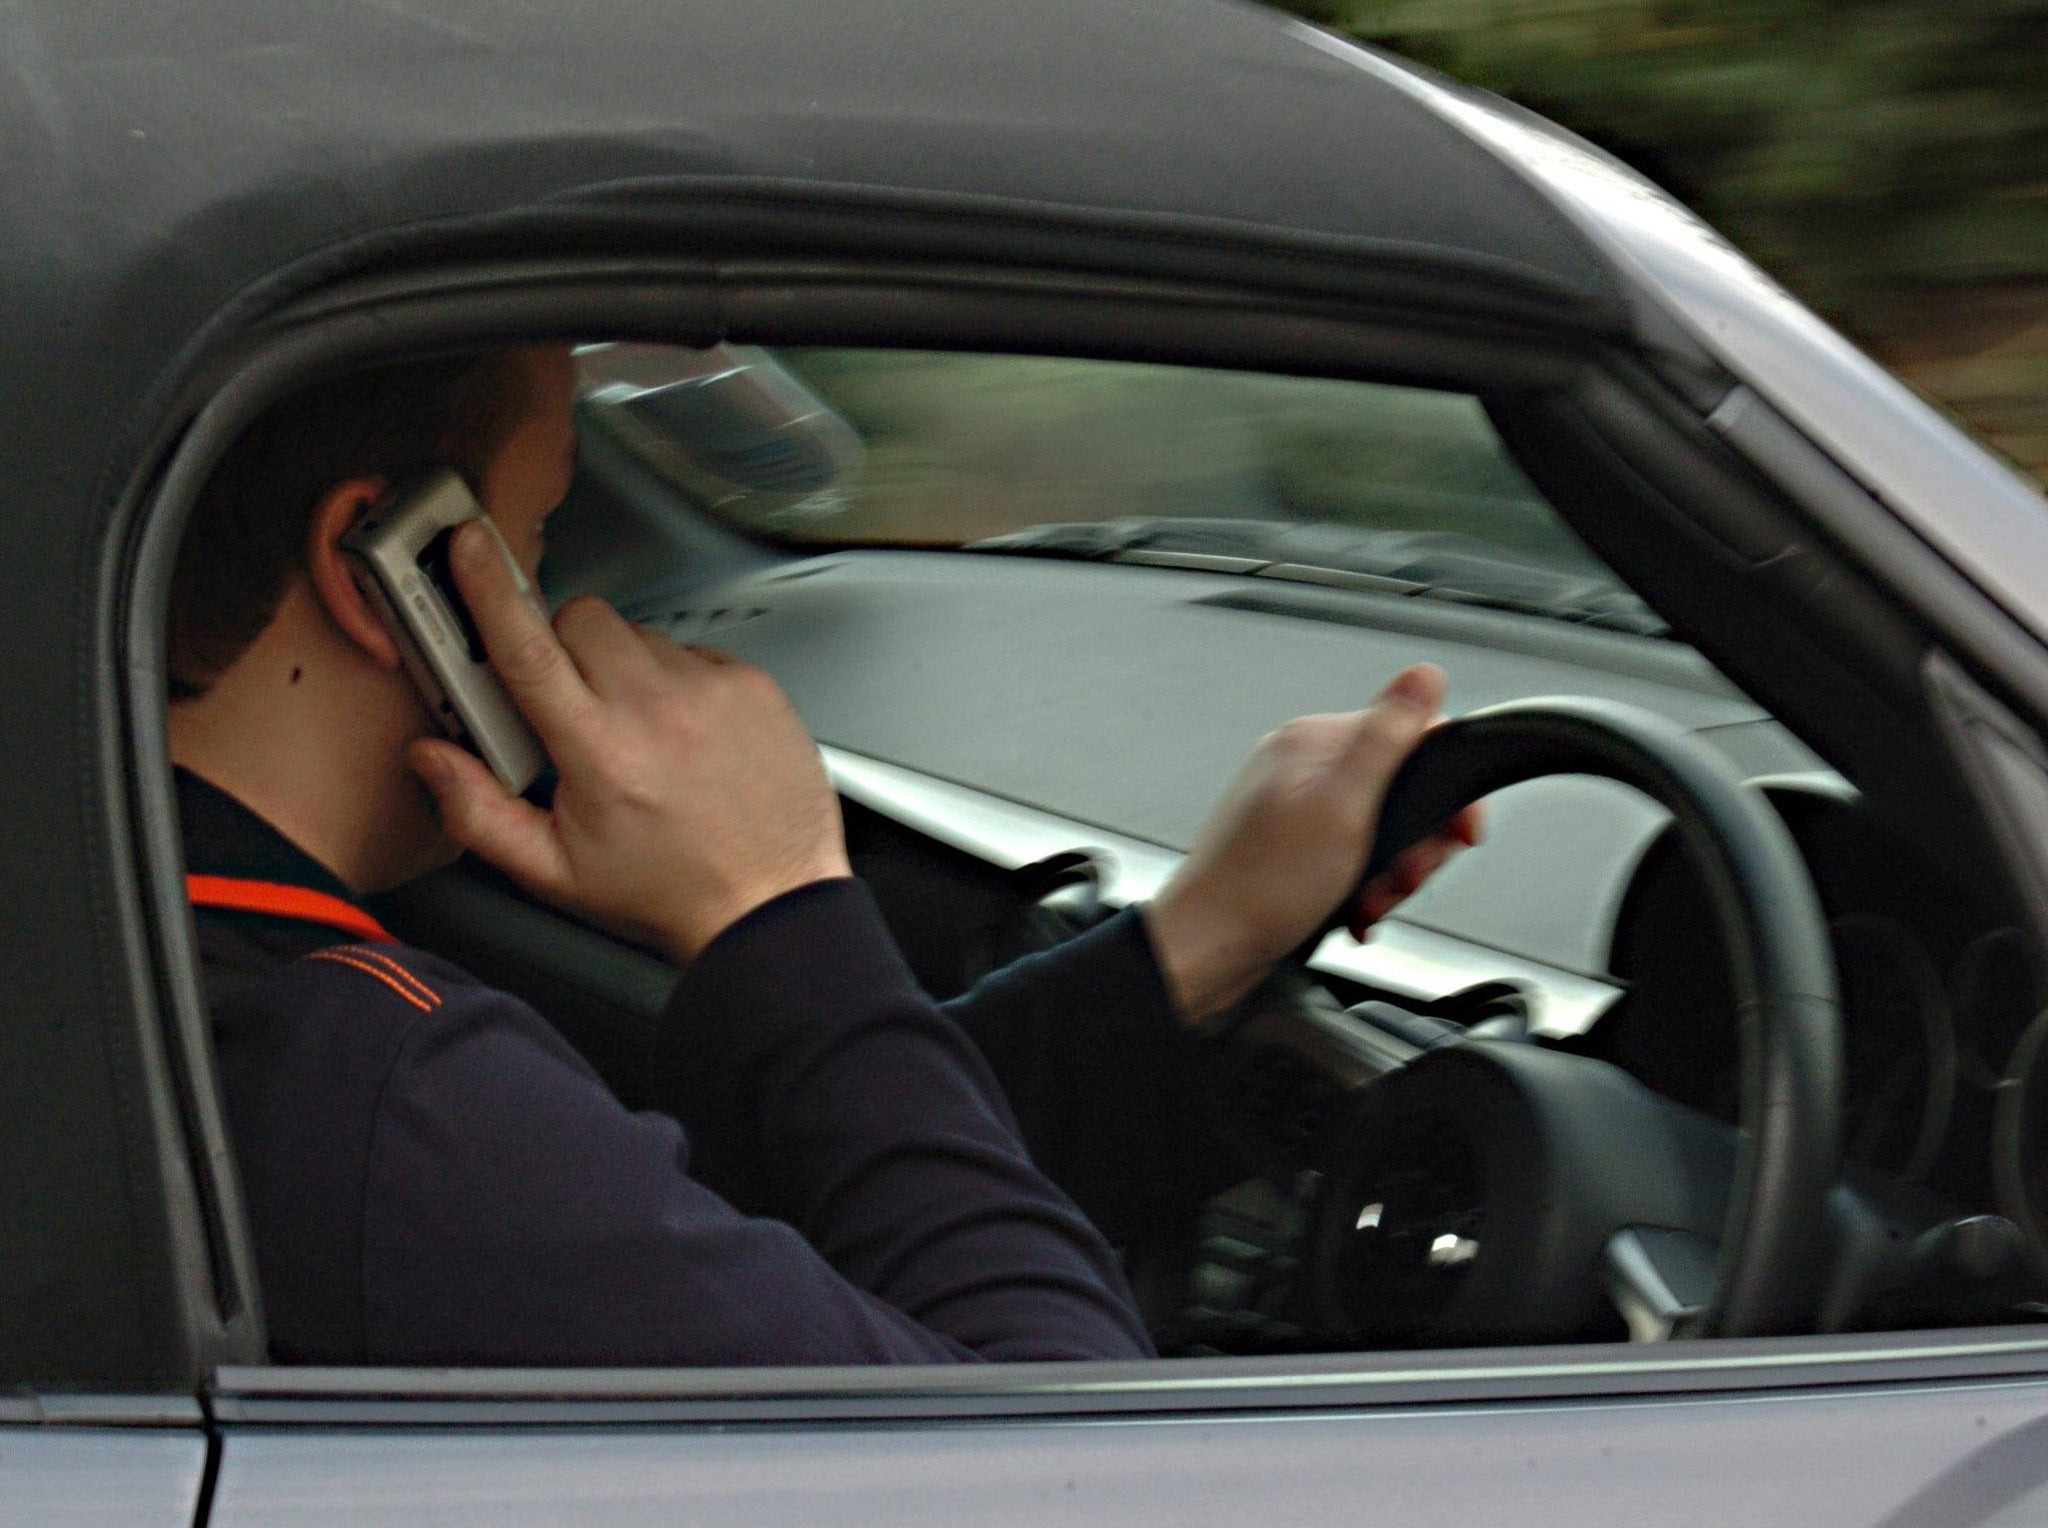 It’s not just drivers who are a menace with a mobile phone in their hand